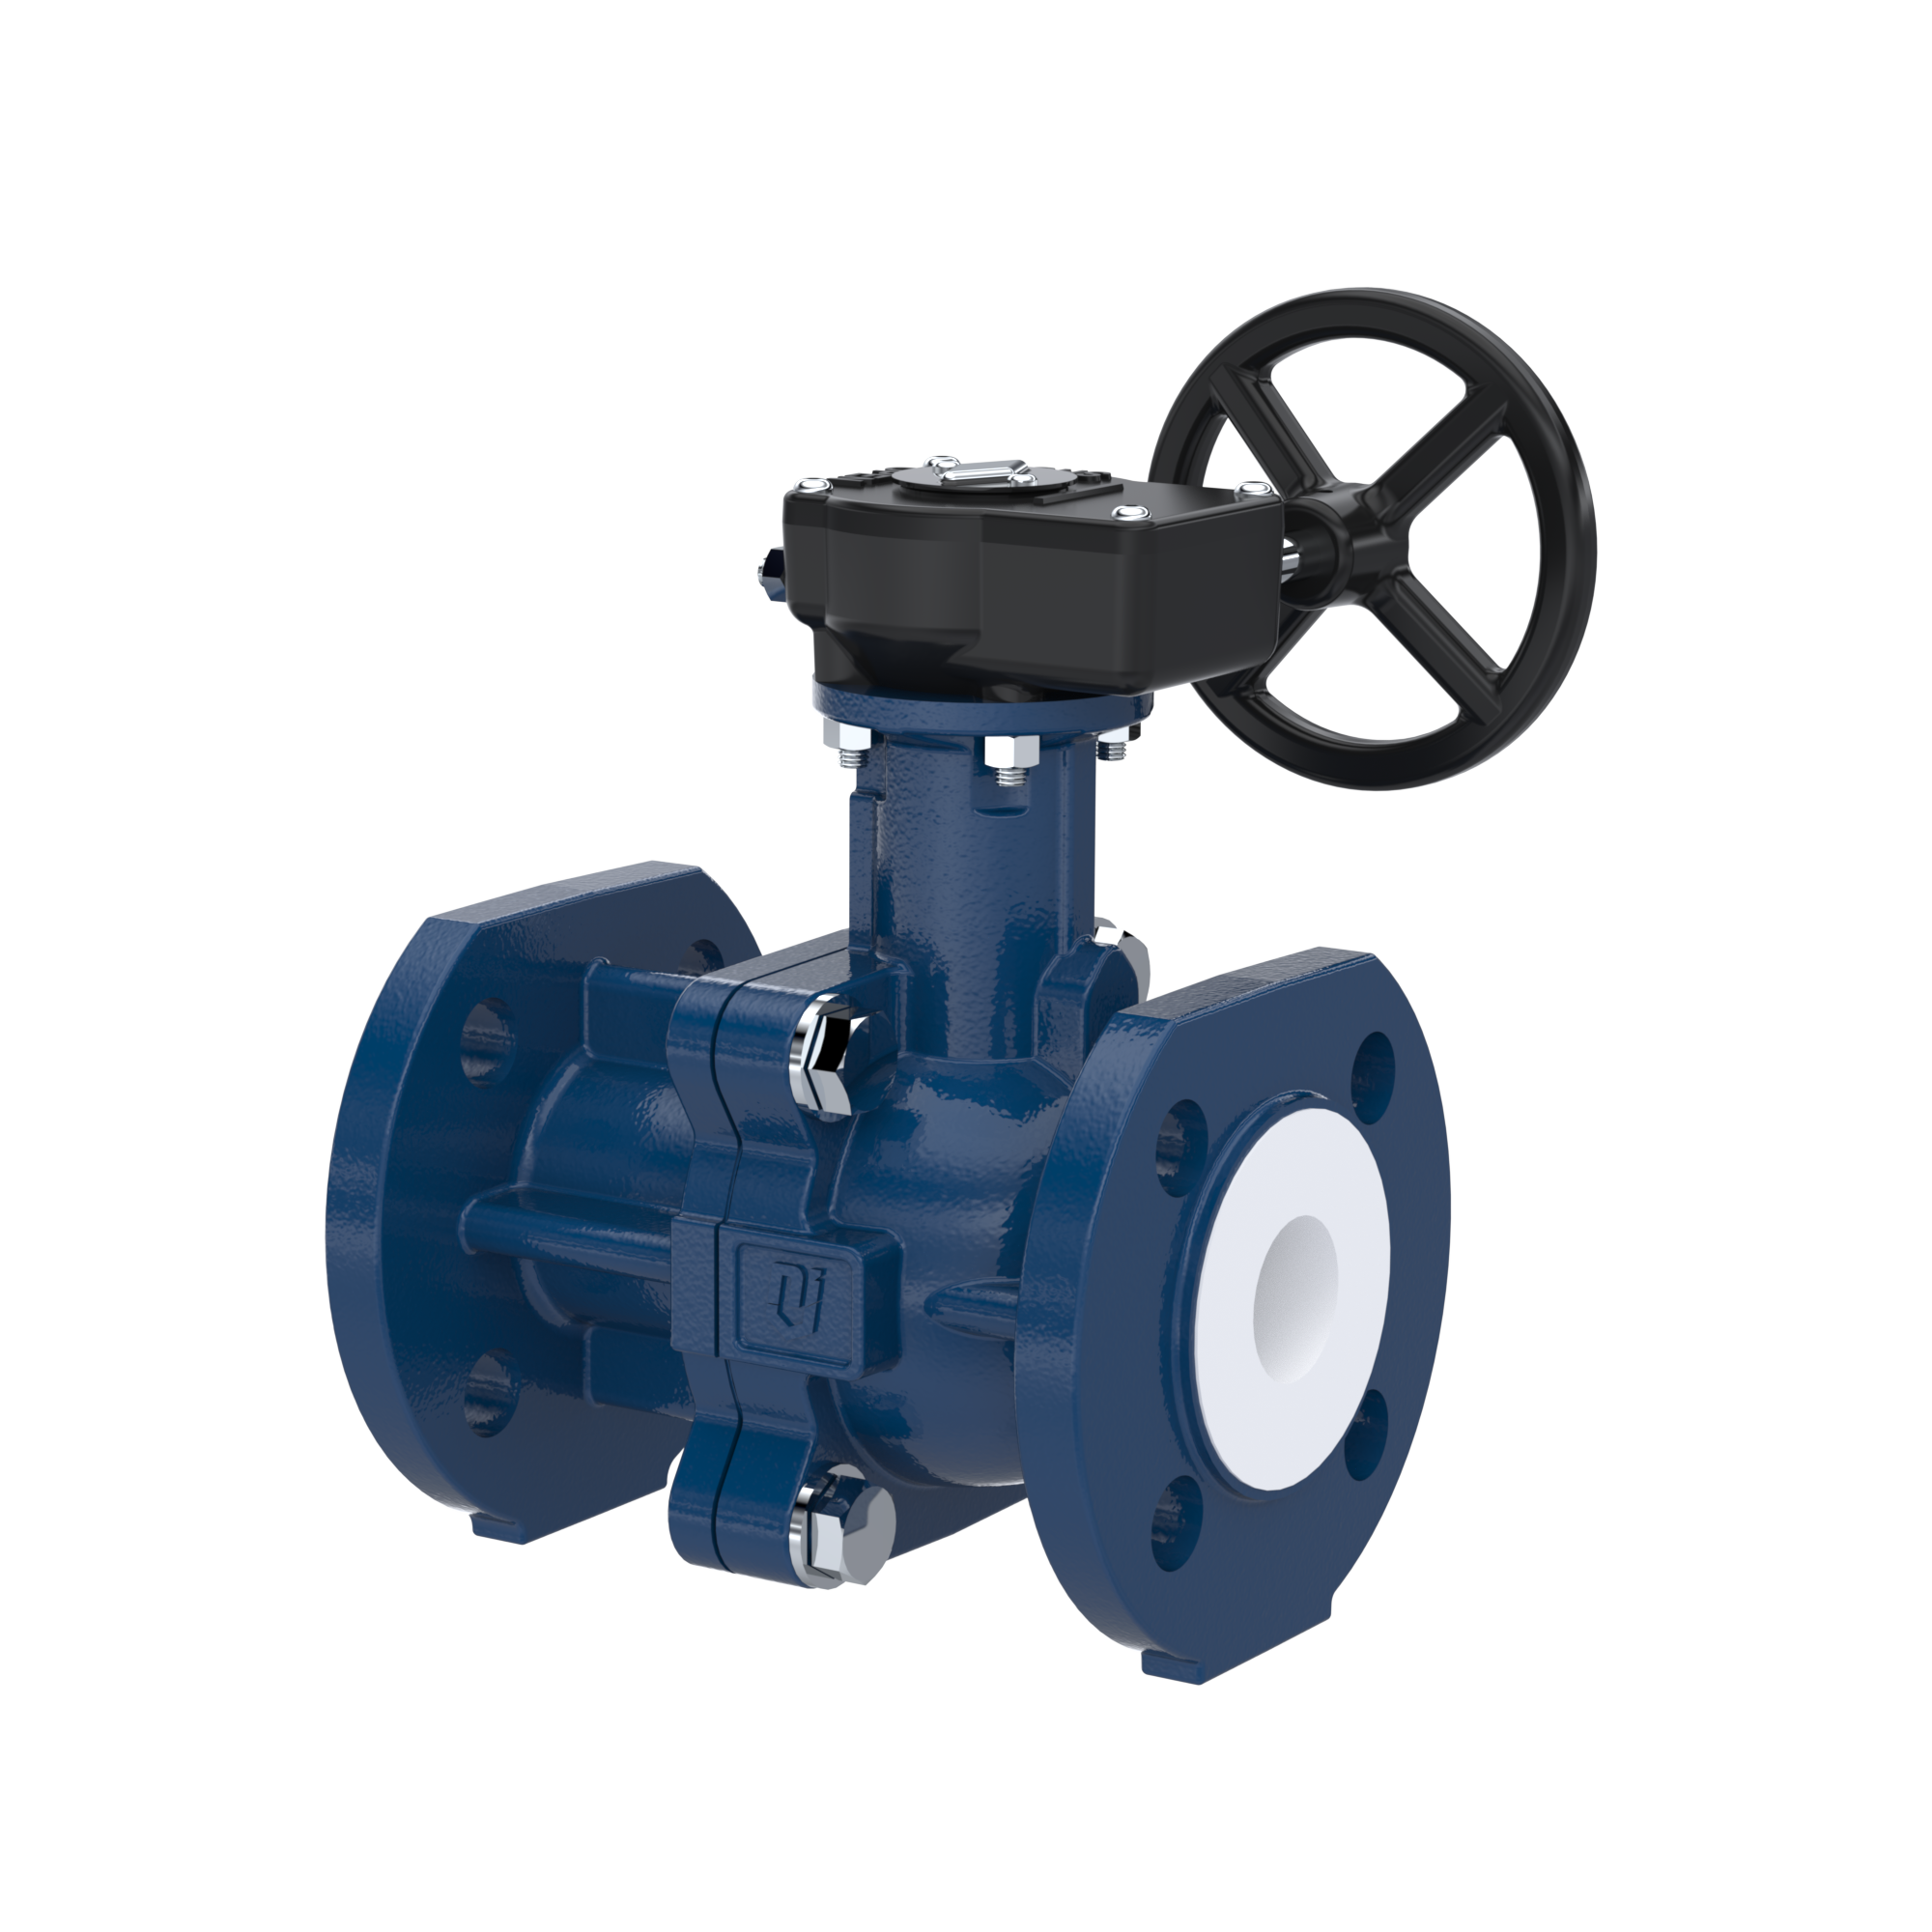 PFA-flange ball valve FK13 DN20 - 3/4" inch PN10/16 made of spheroidal graphite cast iron with worm gear